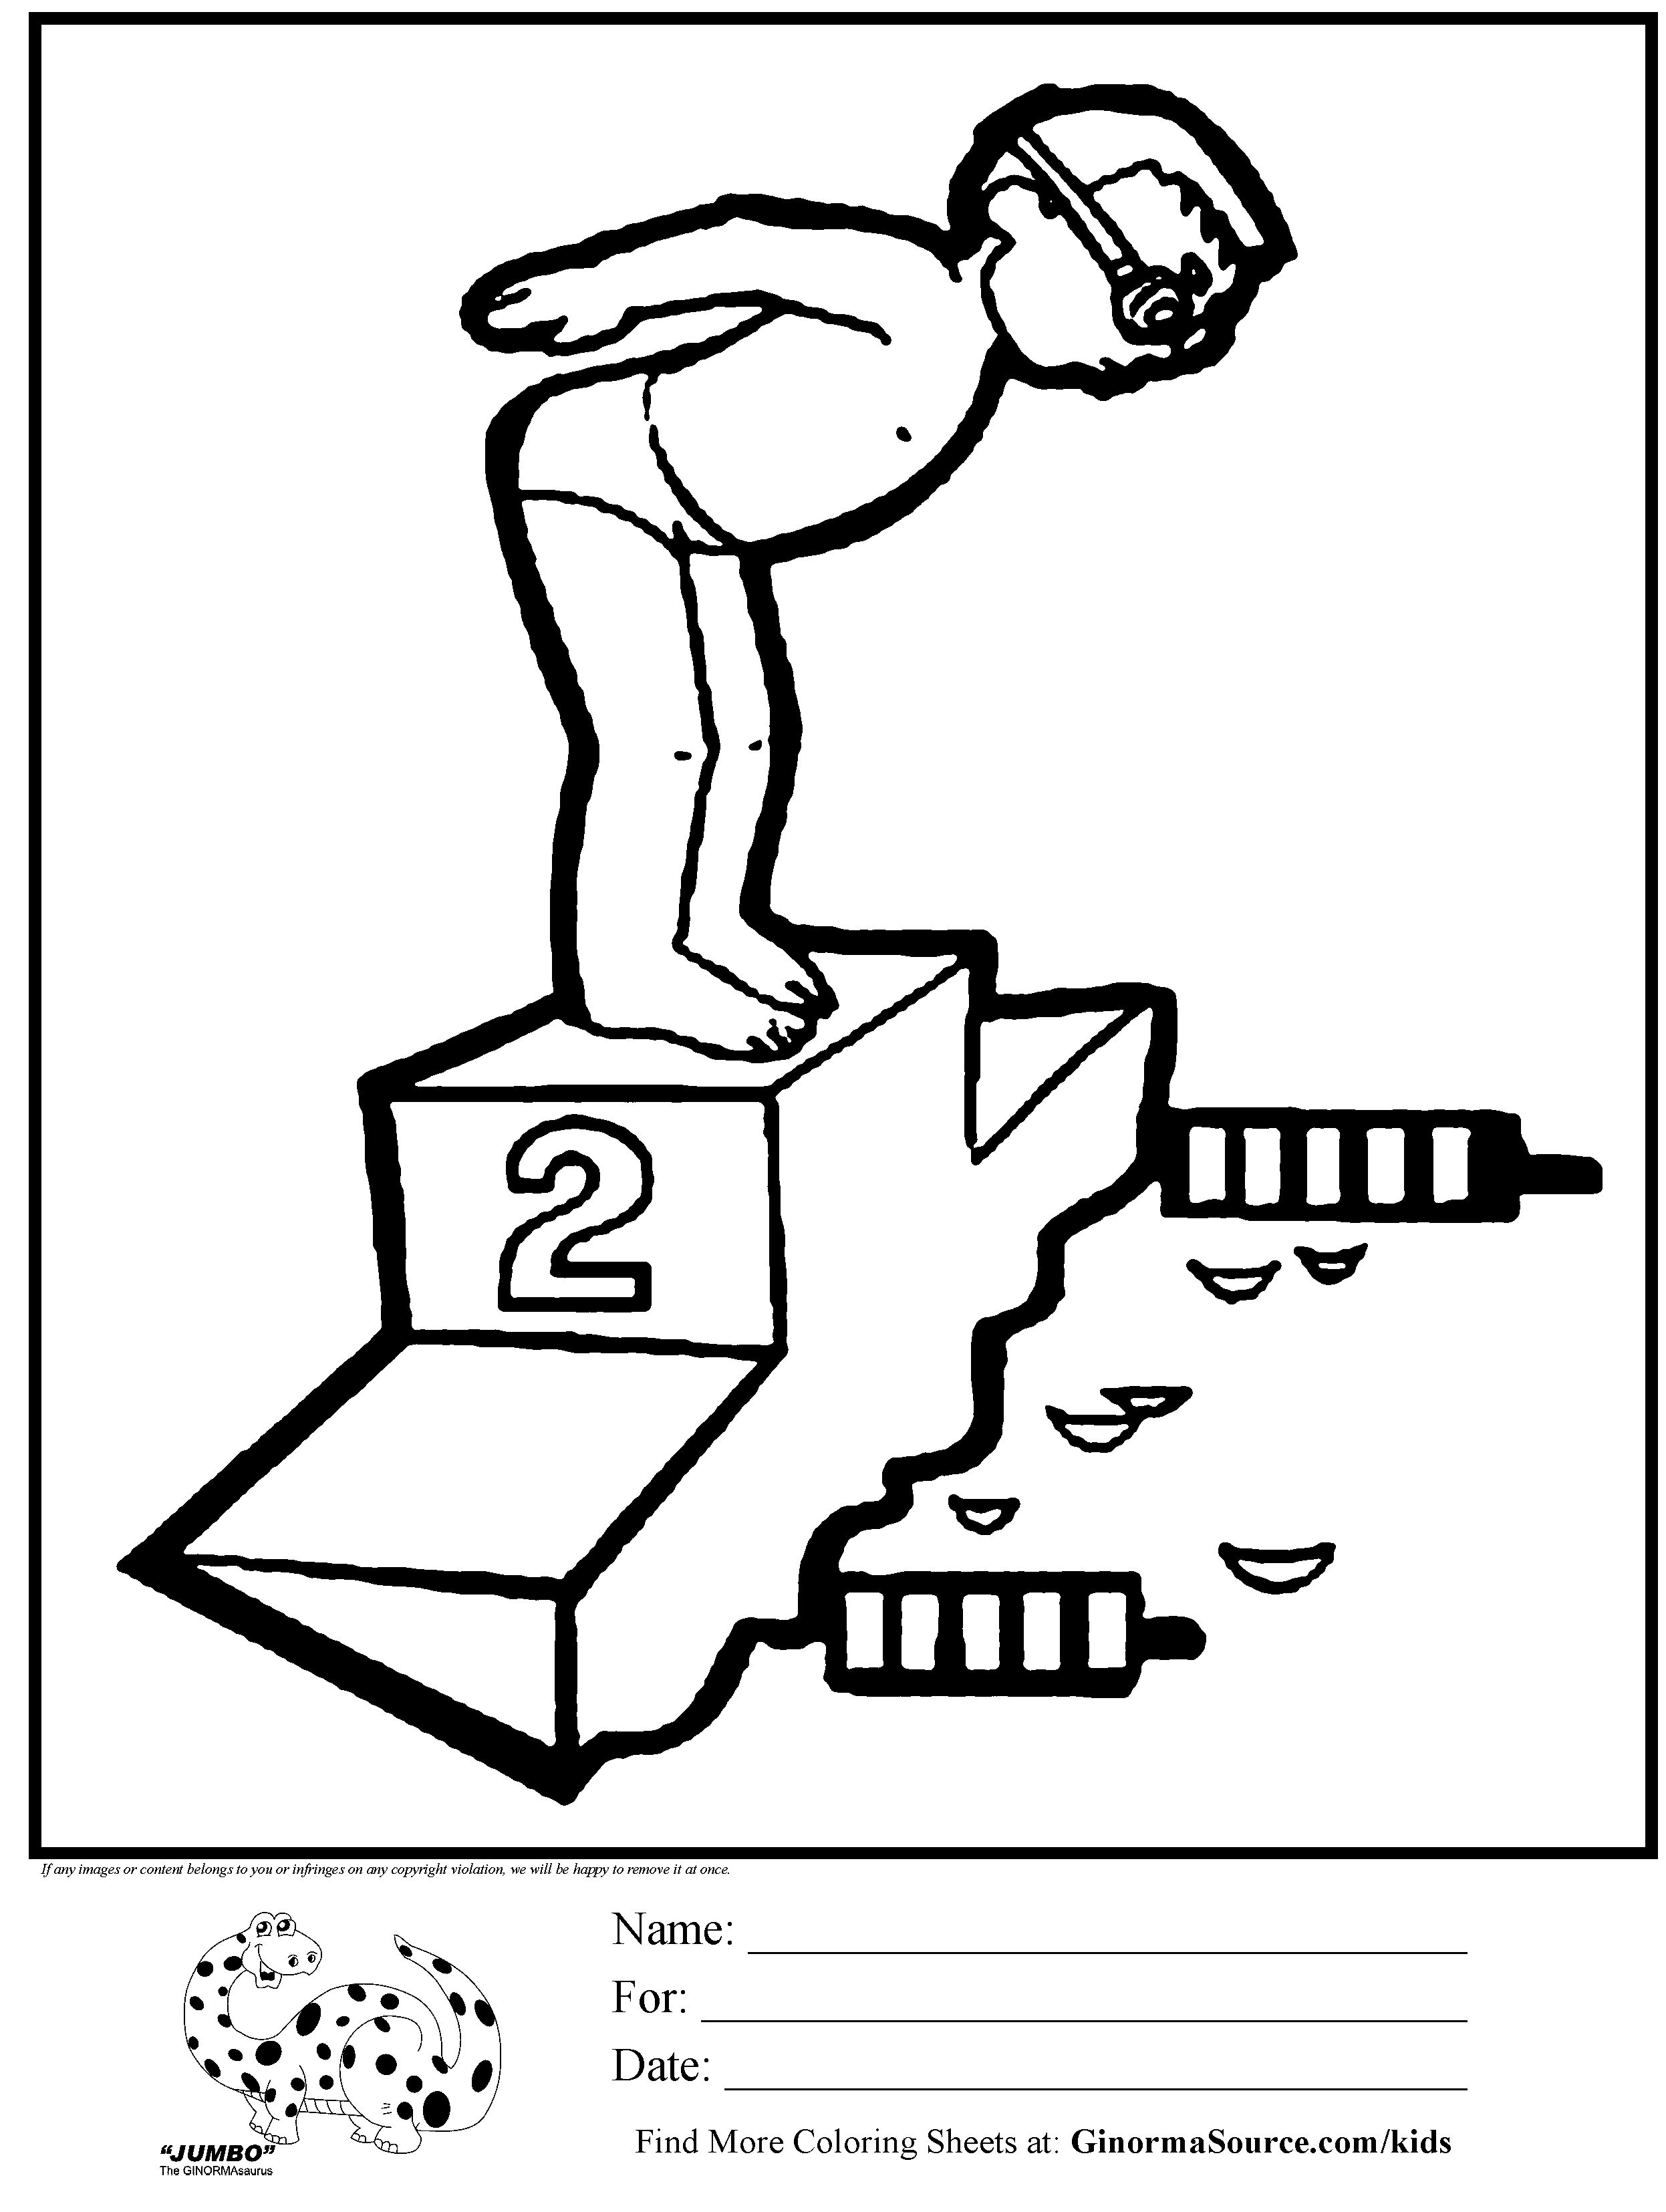 Images For > Olympic Swimming Coloring Pages